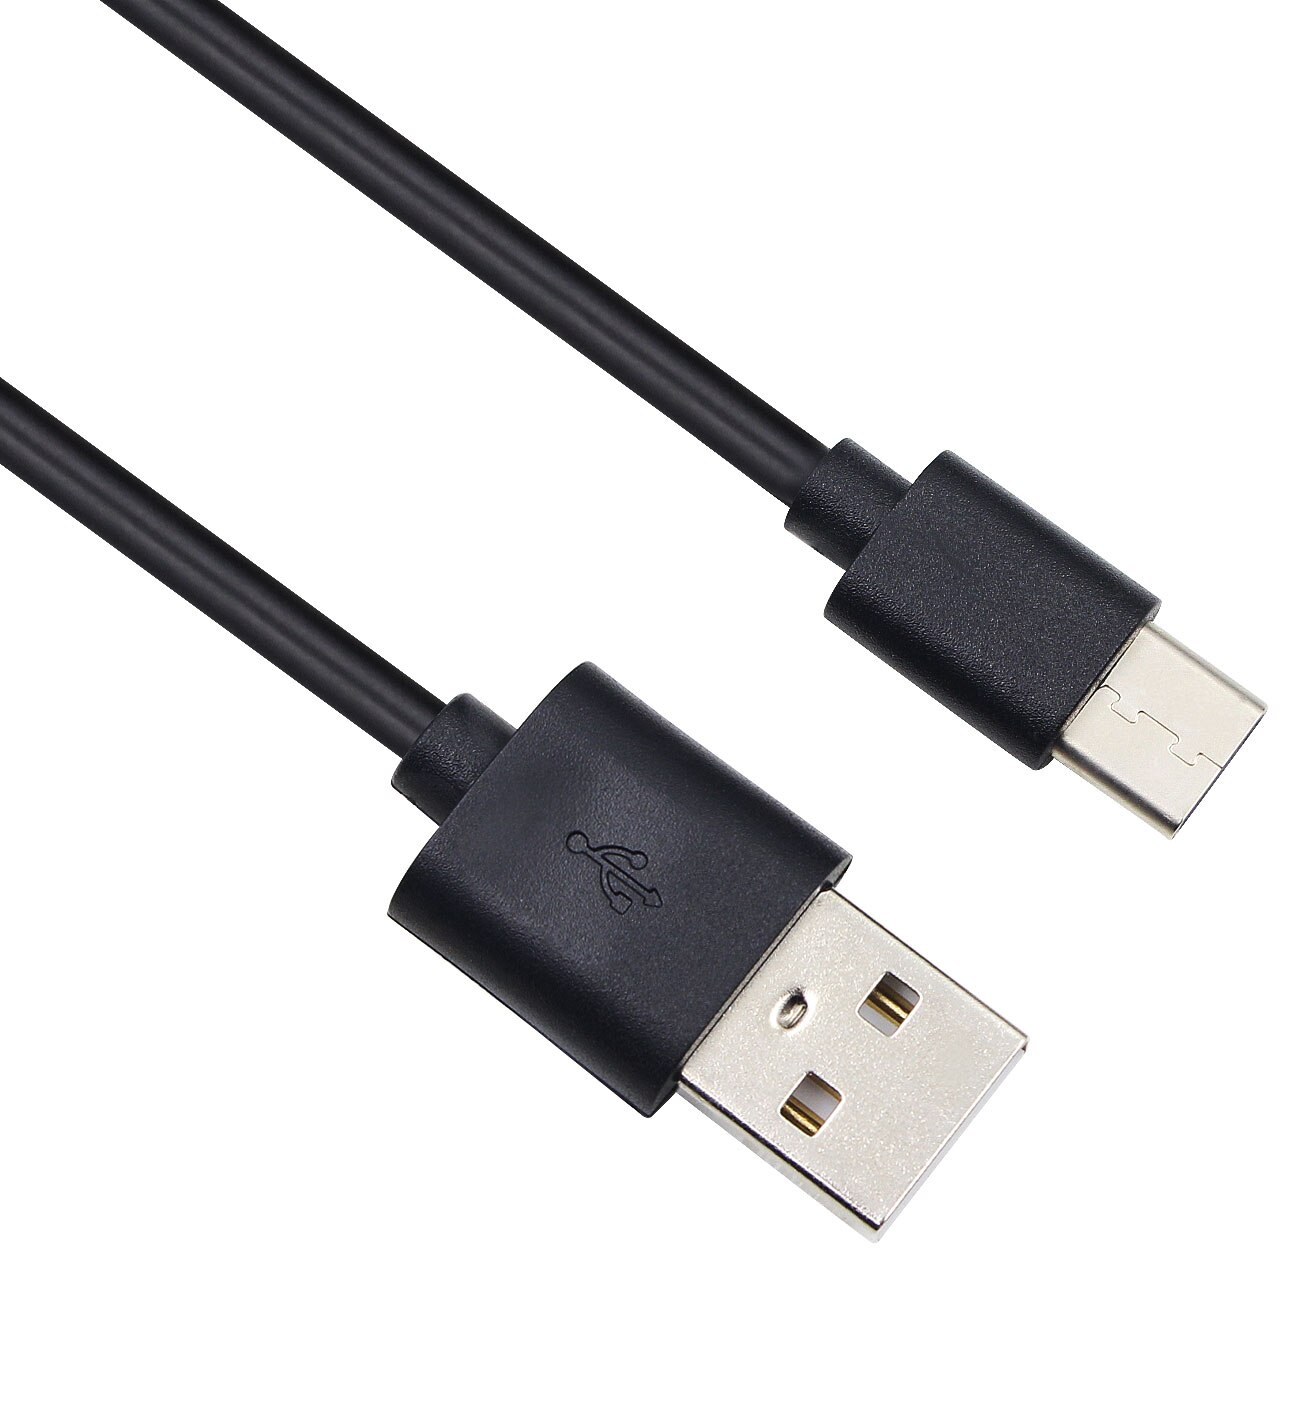 Usb Power Adapter Oplader Opladen Data Sync Cable Koord Voor Archos Gevoel 101X